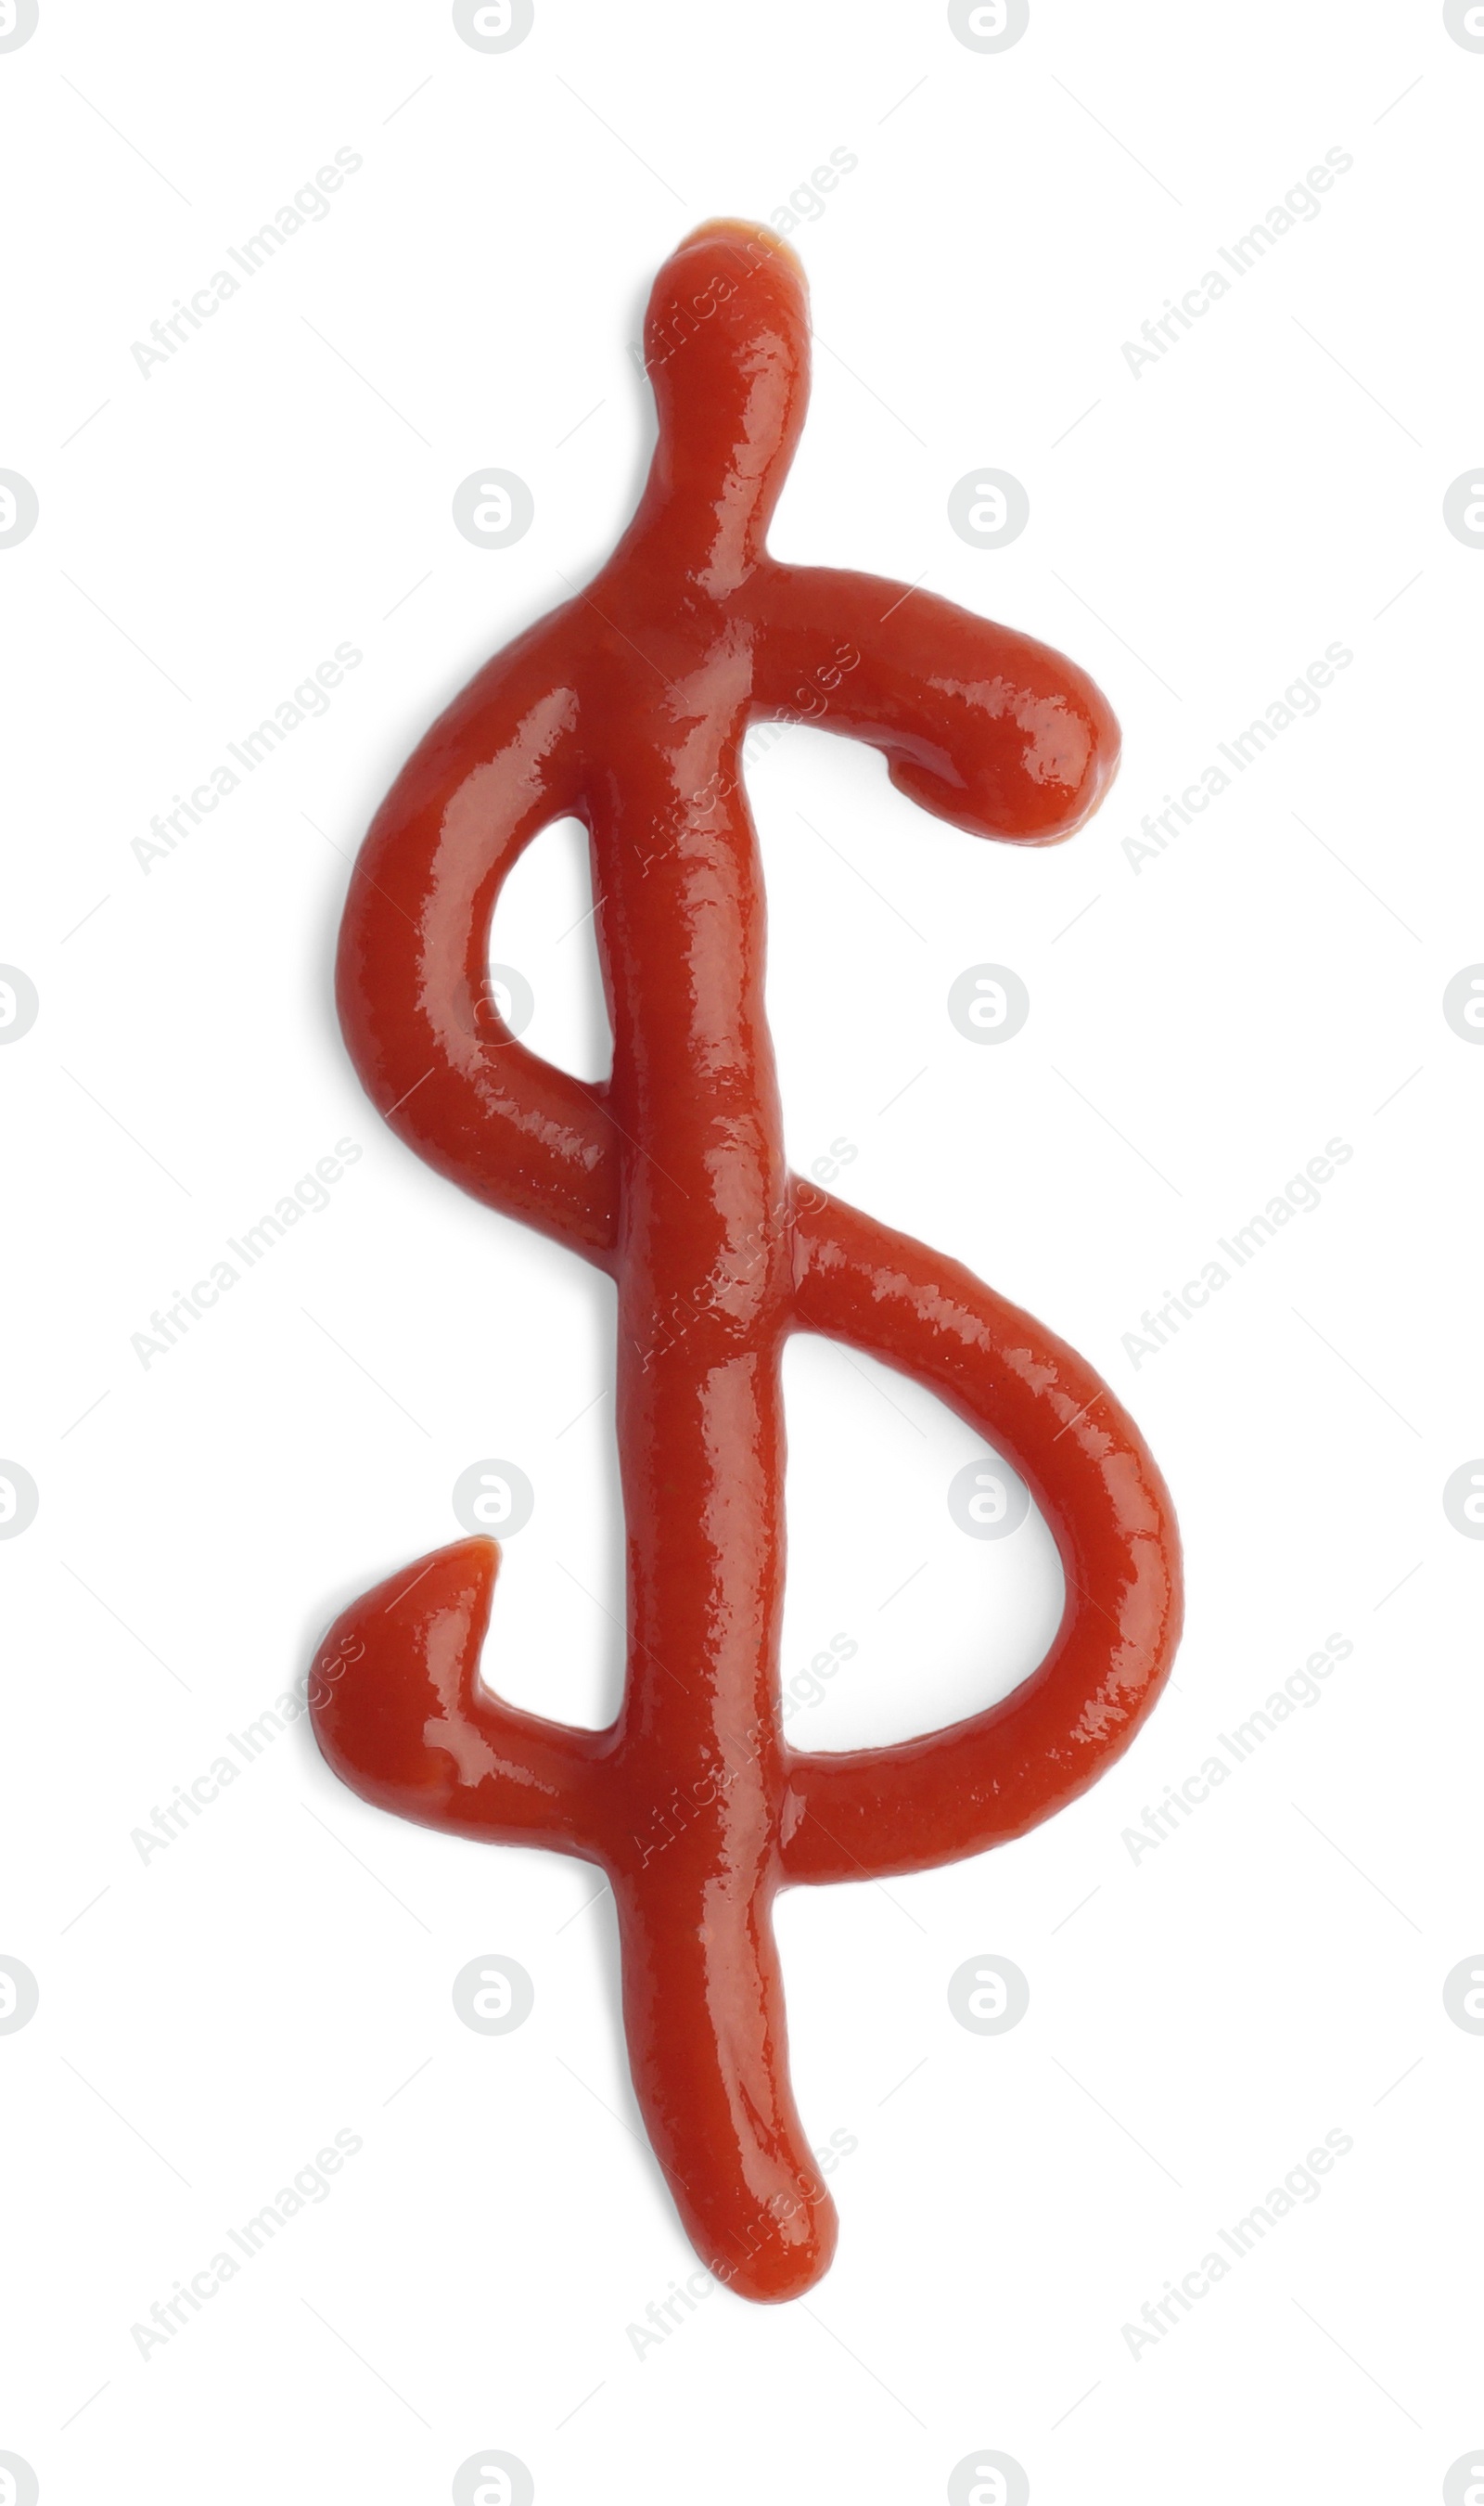 Photo of Dollar symbol drawn by ketchup on white background